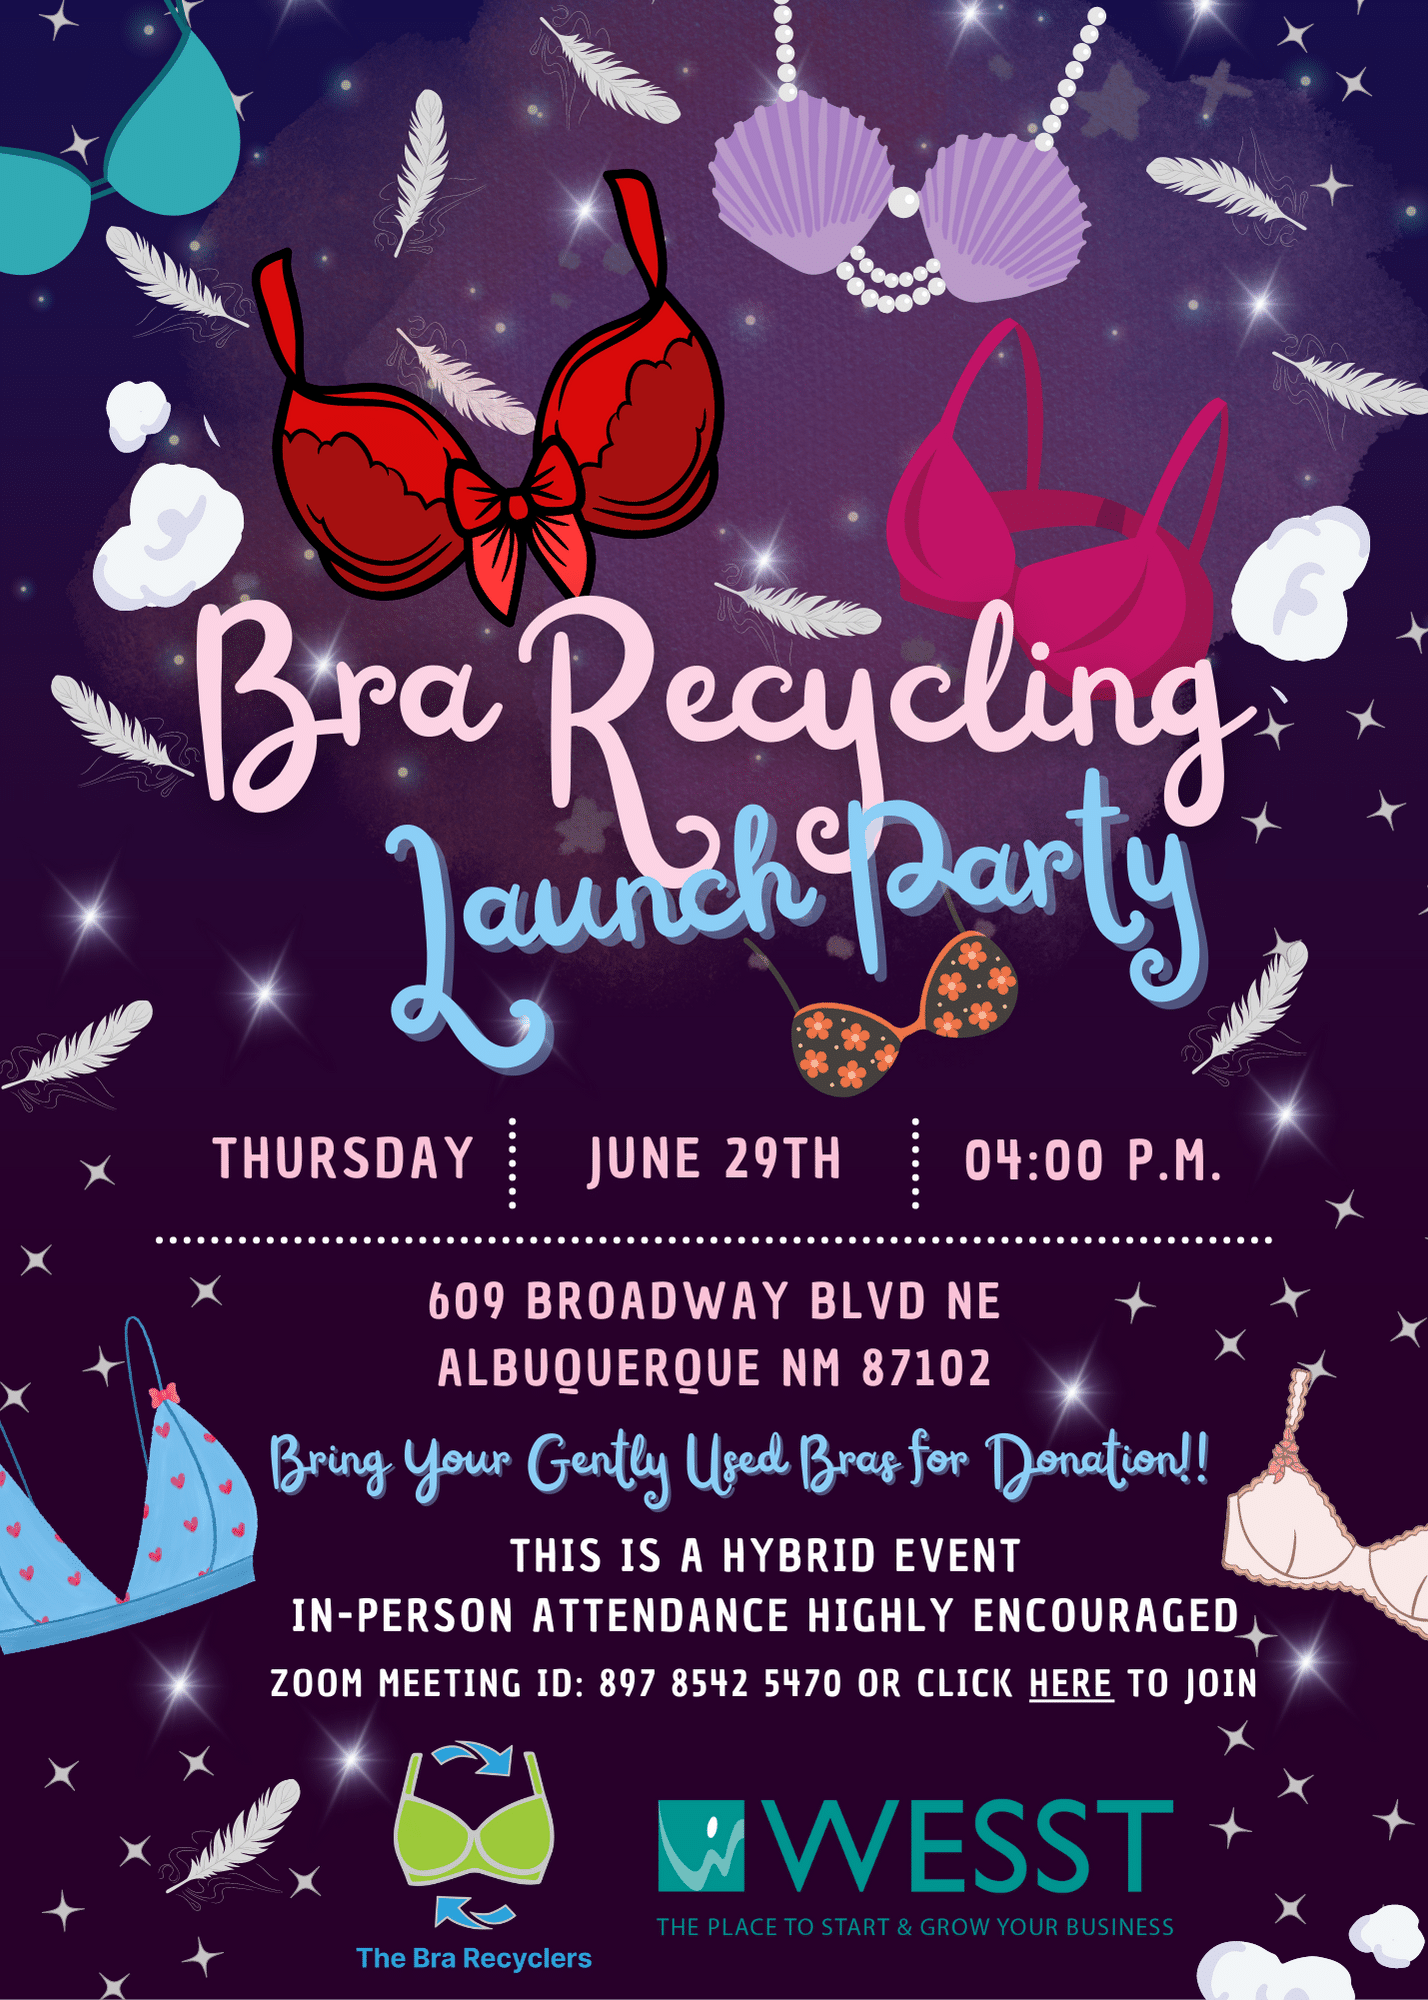 Bra Recycling Launch Party - WESST